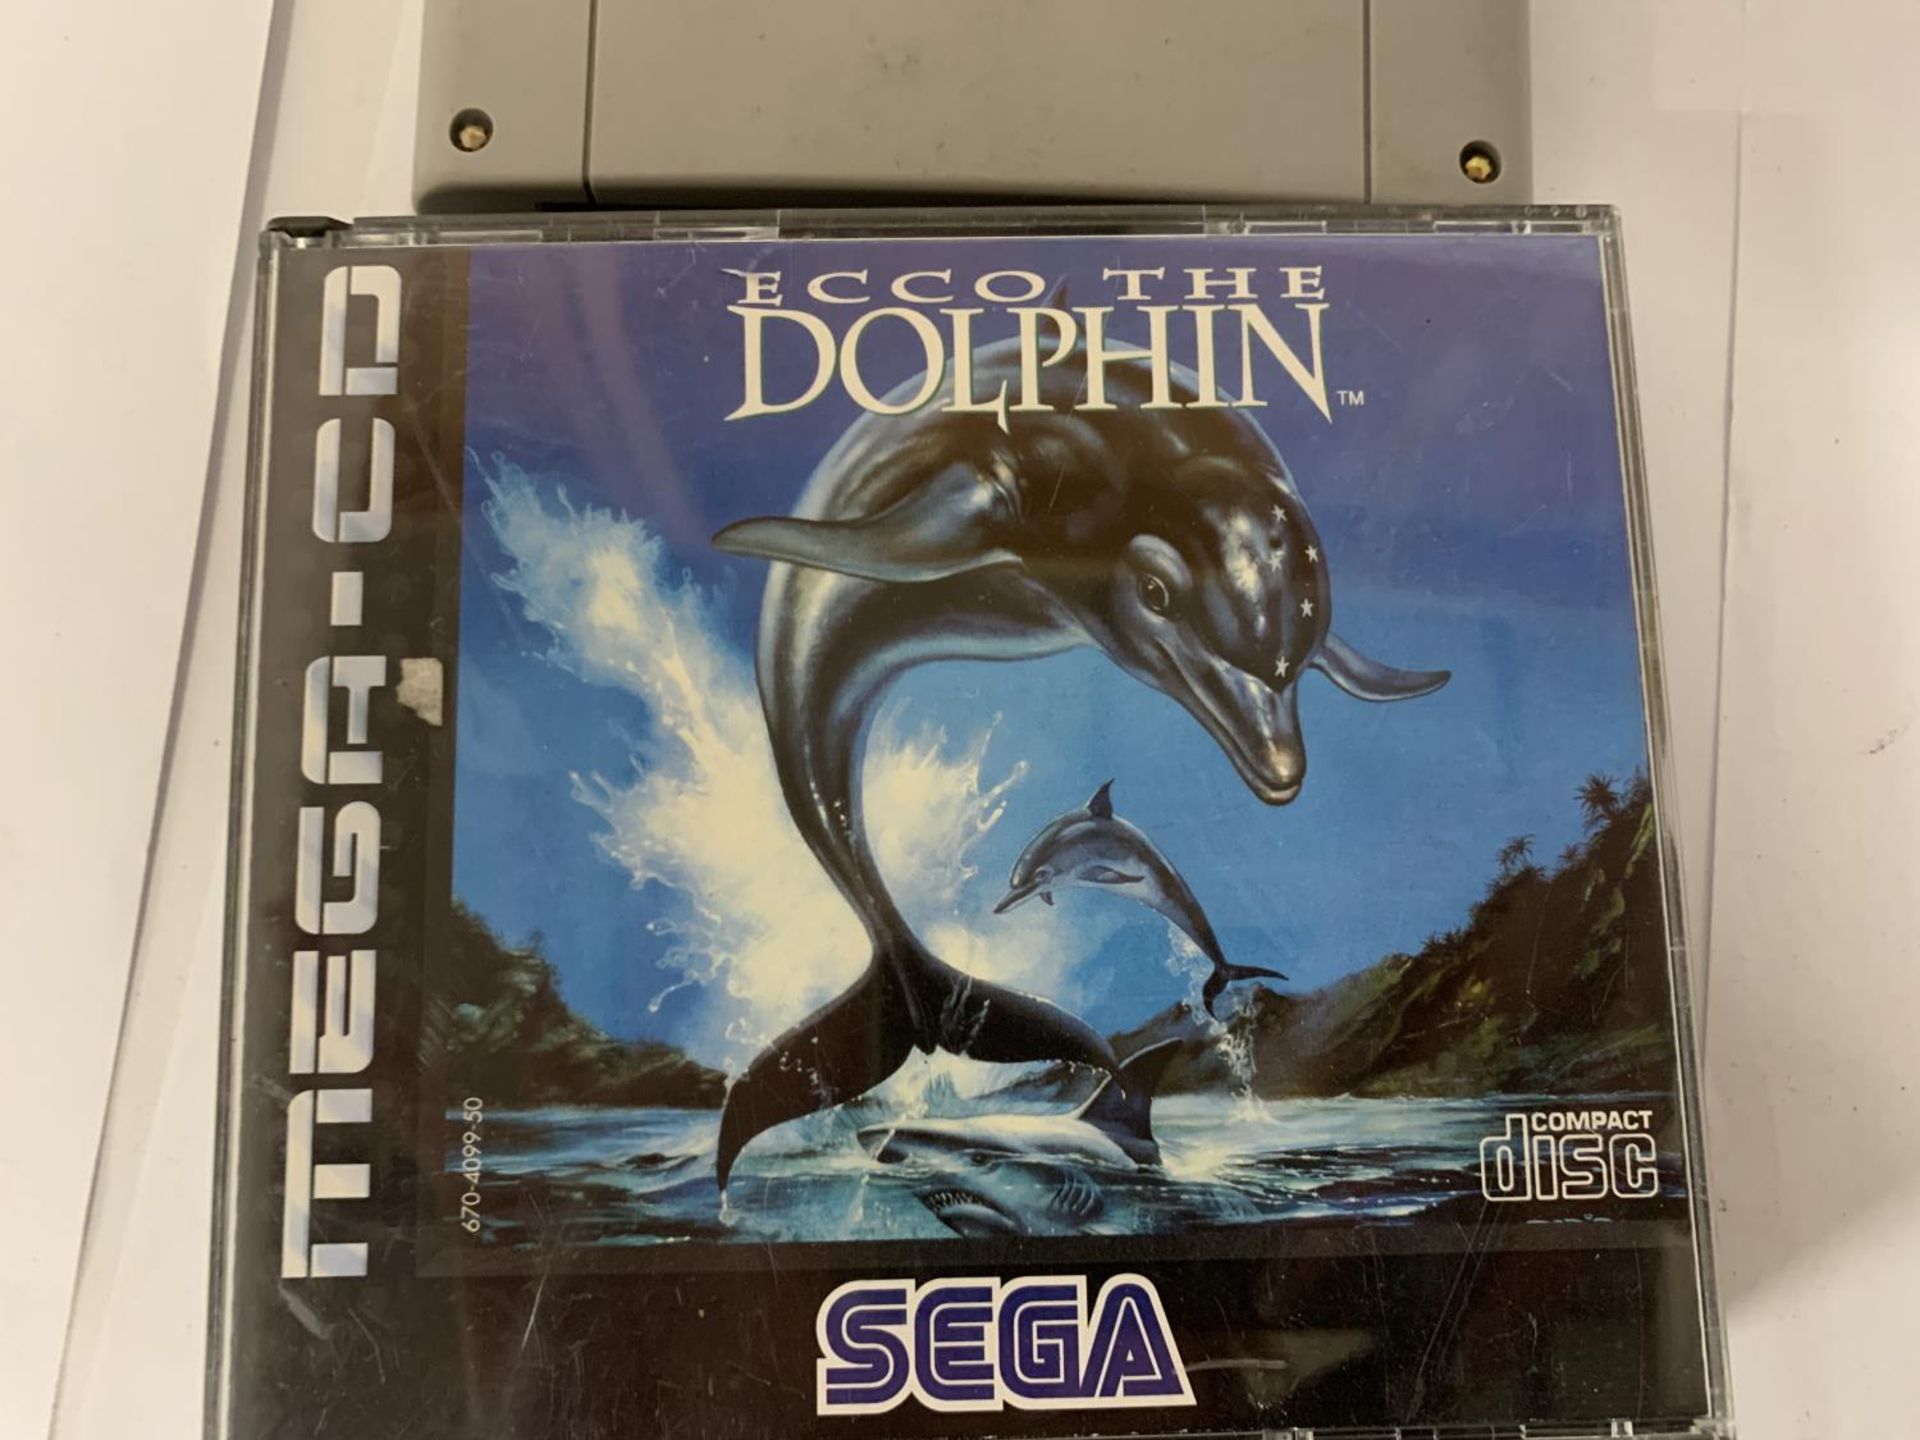 THREE SEGA GAMES INCLUDING STAR WARS ROGUE SQUADRON, STREET FIGHTER II AND ECCO THE DOLPHIN - Image 3 of 4